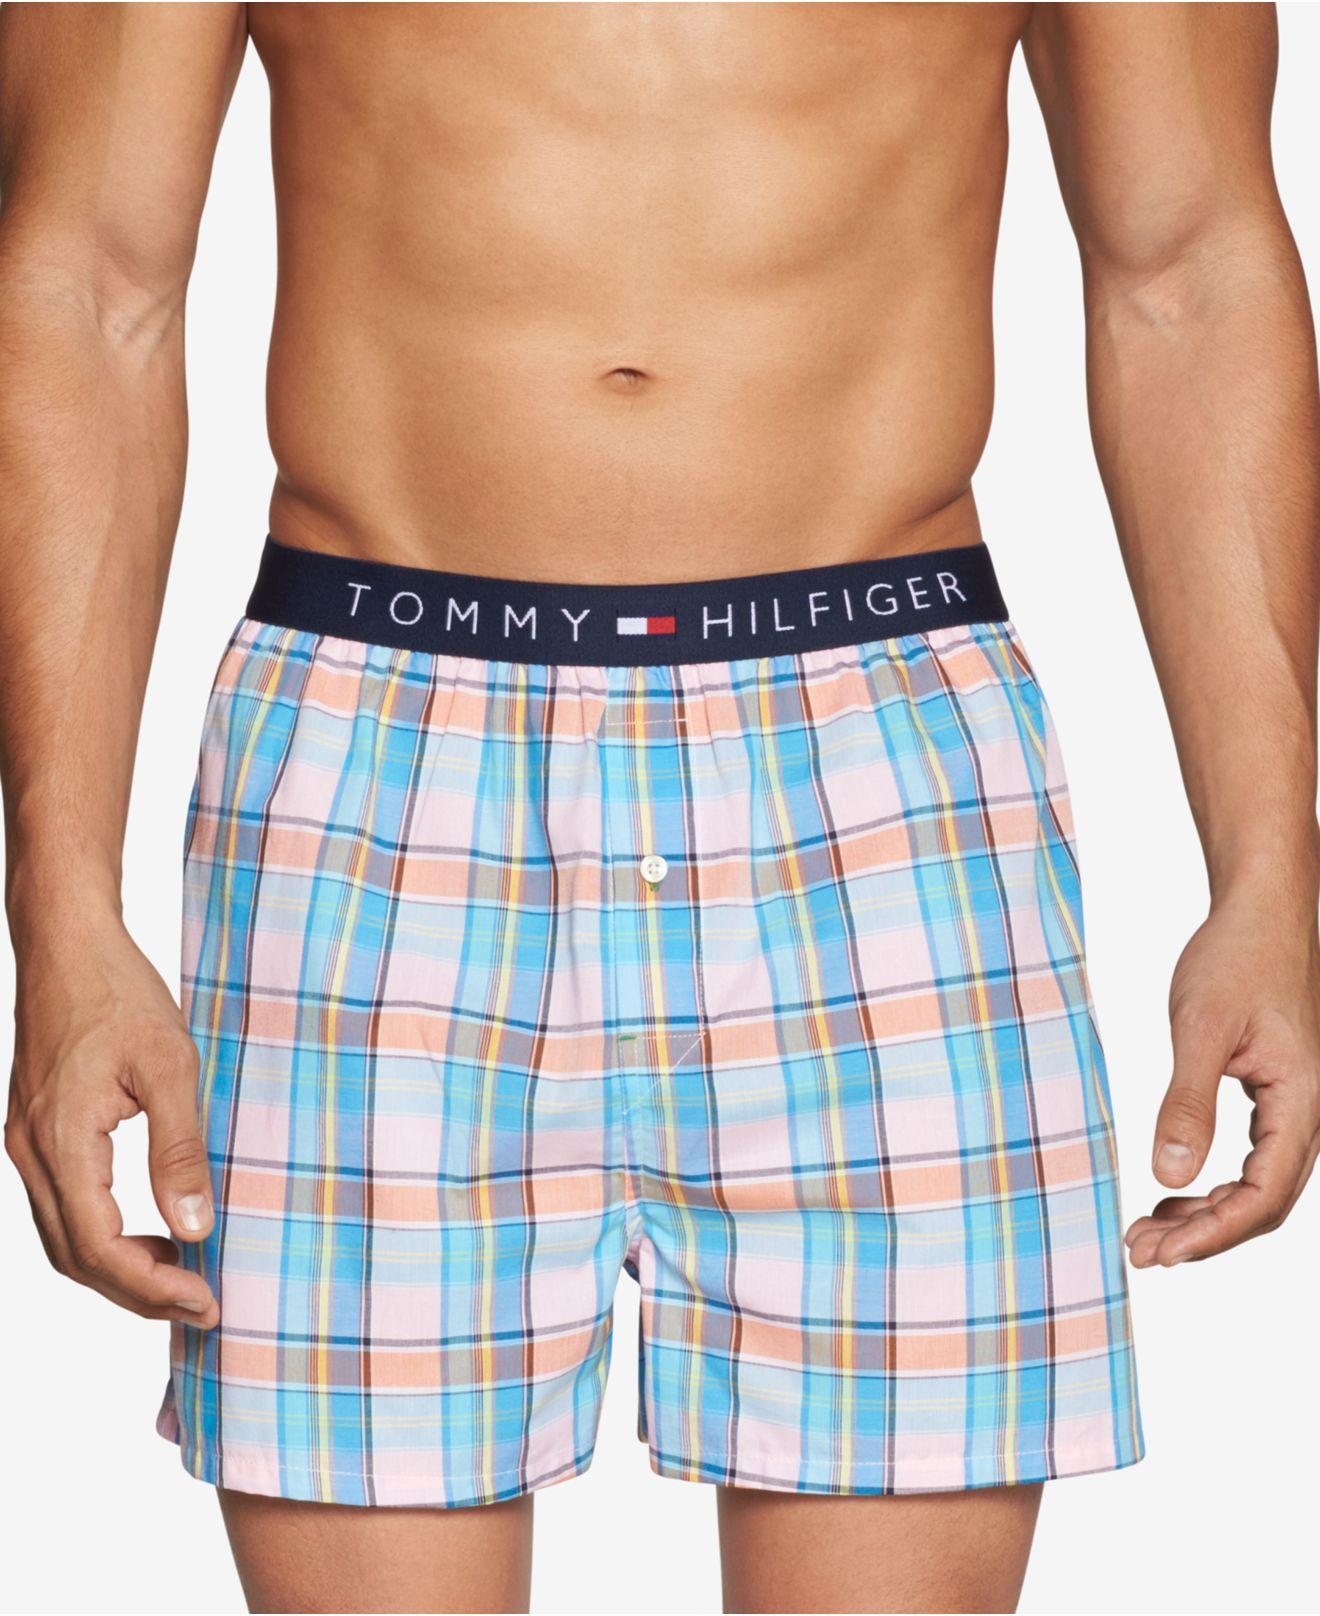 Tommy Hilfiger Printed Cotton Boxers in Blue for Men - Lyst